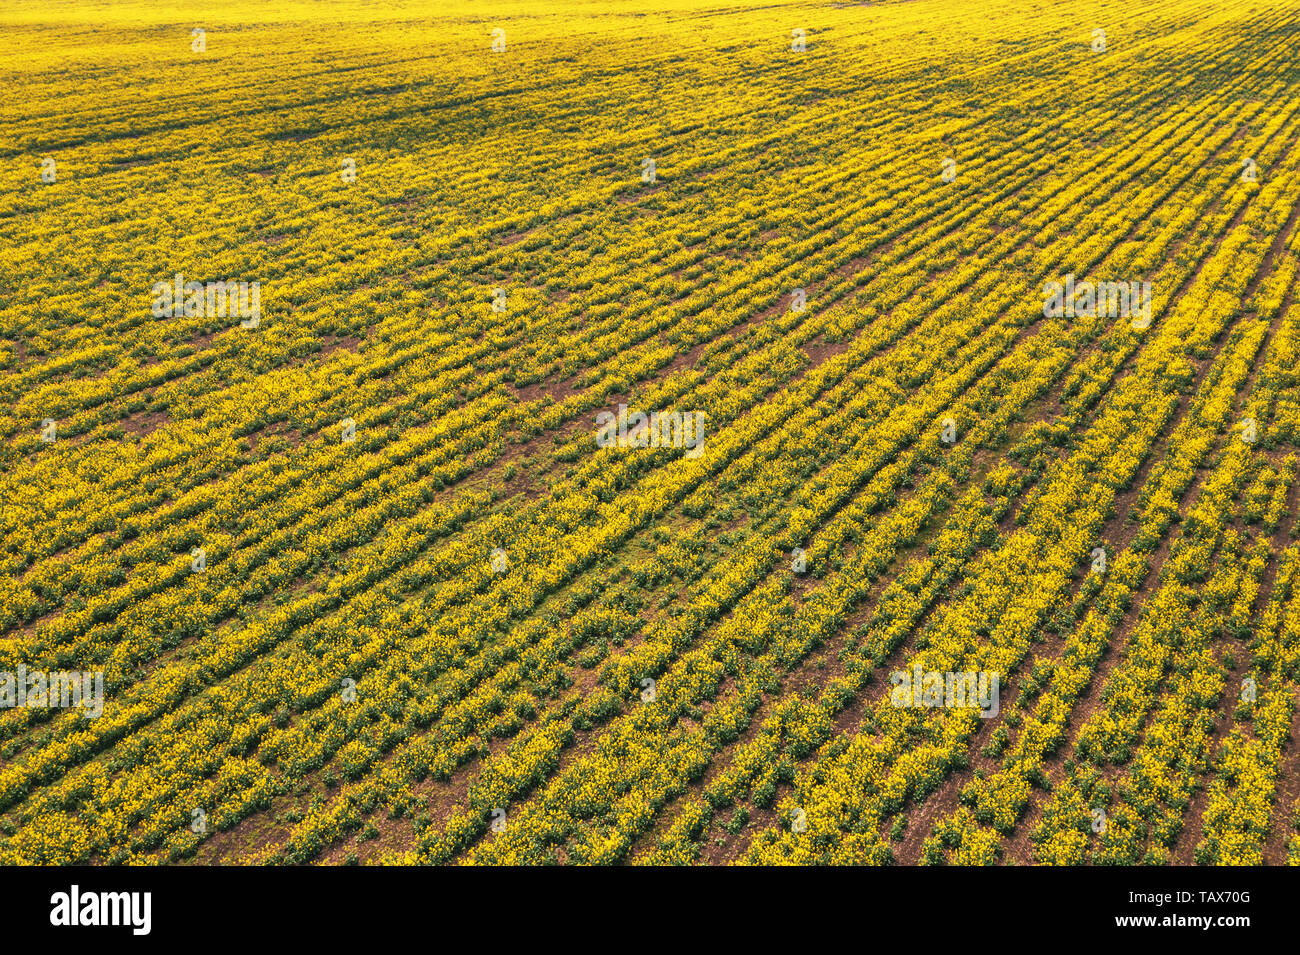 Aerial view of canola rapeseed field in poor condition due to drought season and arid climate Stock Photo